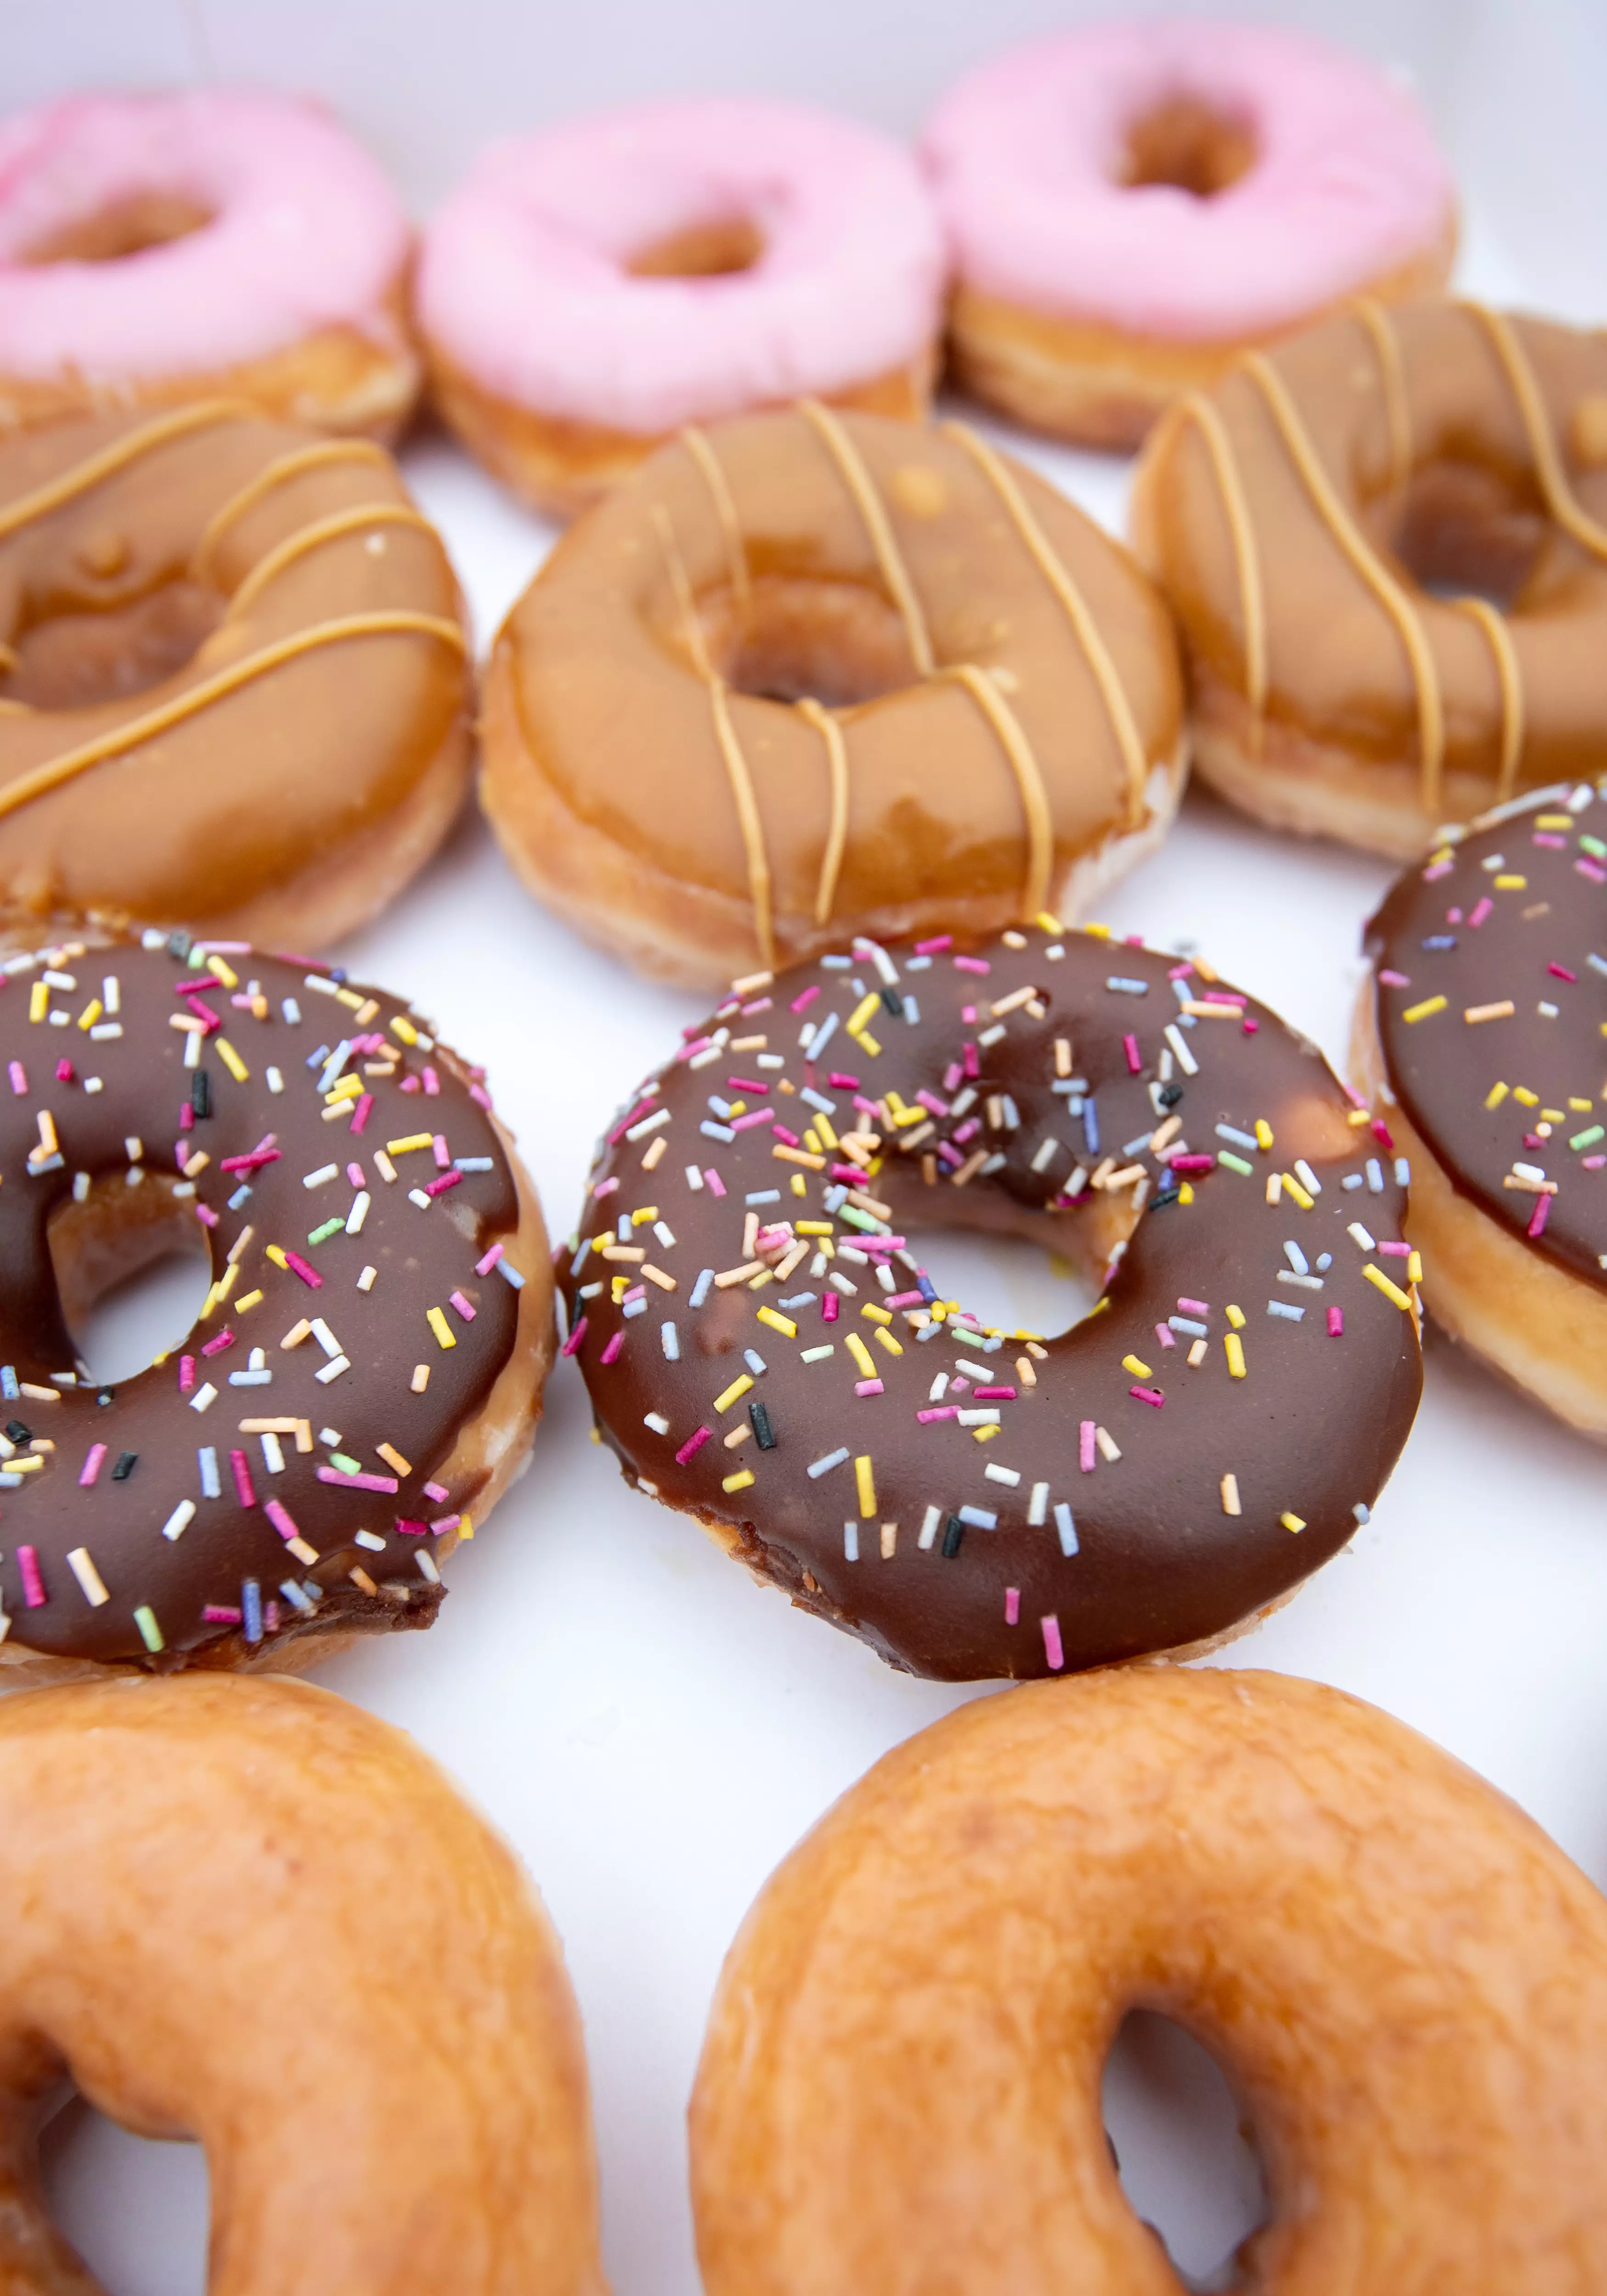 Krispy Kreme doughnuts come in a variety of delicious flavours (